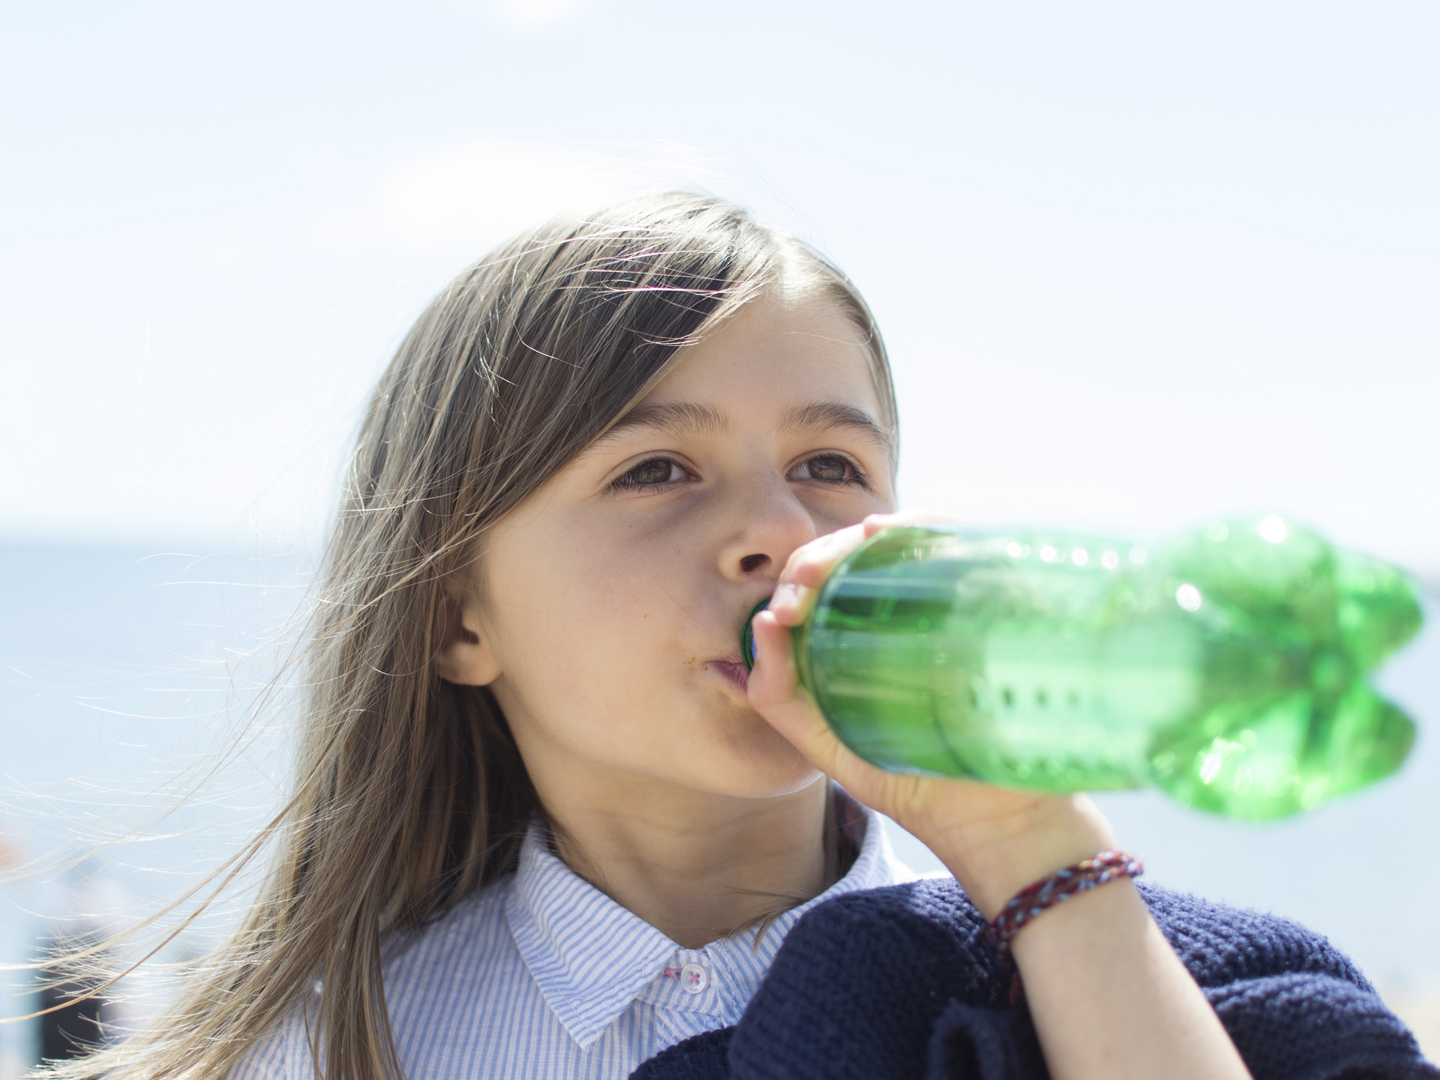 A child drinking a soft drink/pop/soda from a plastic bottle